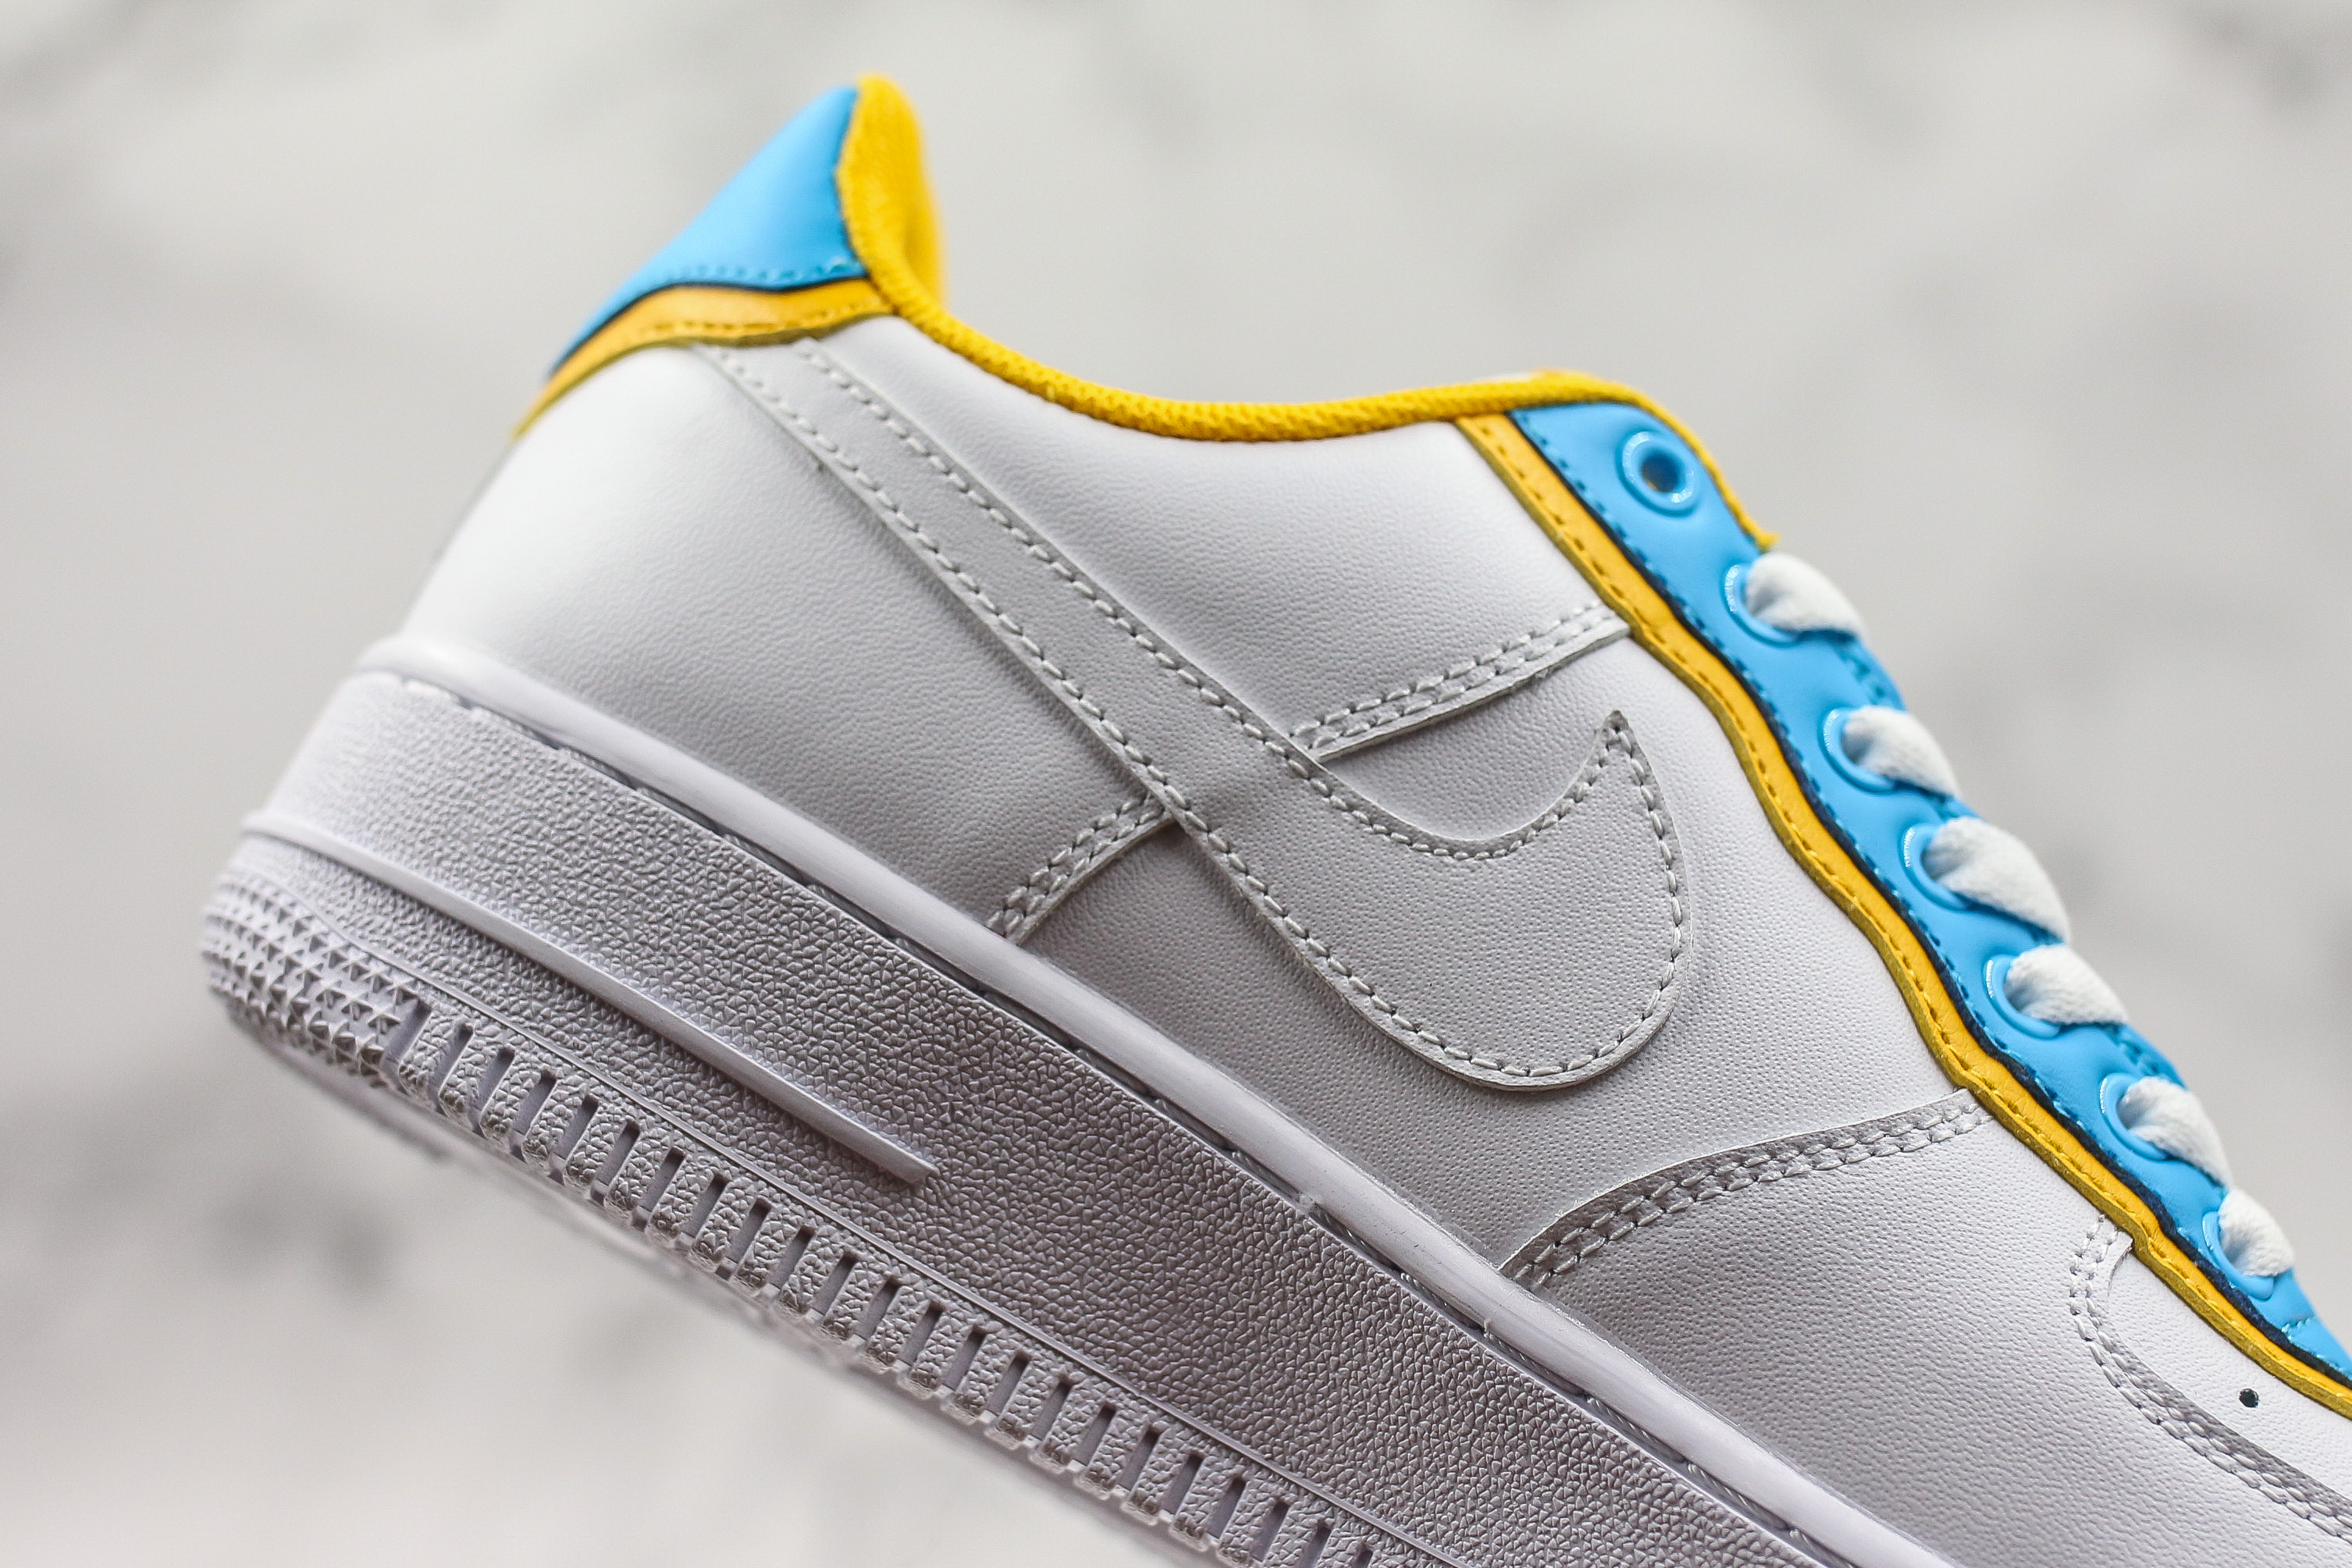 nike air force 1 blue yellow